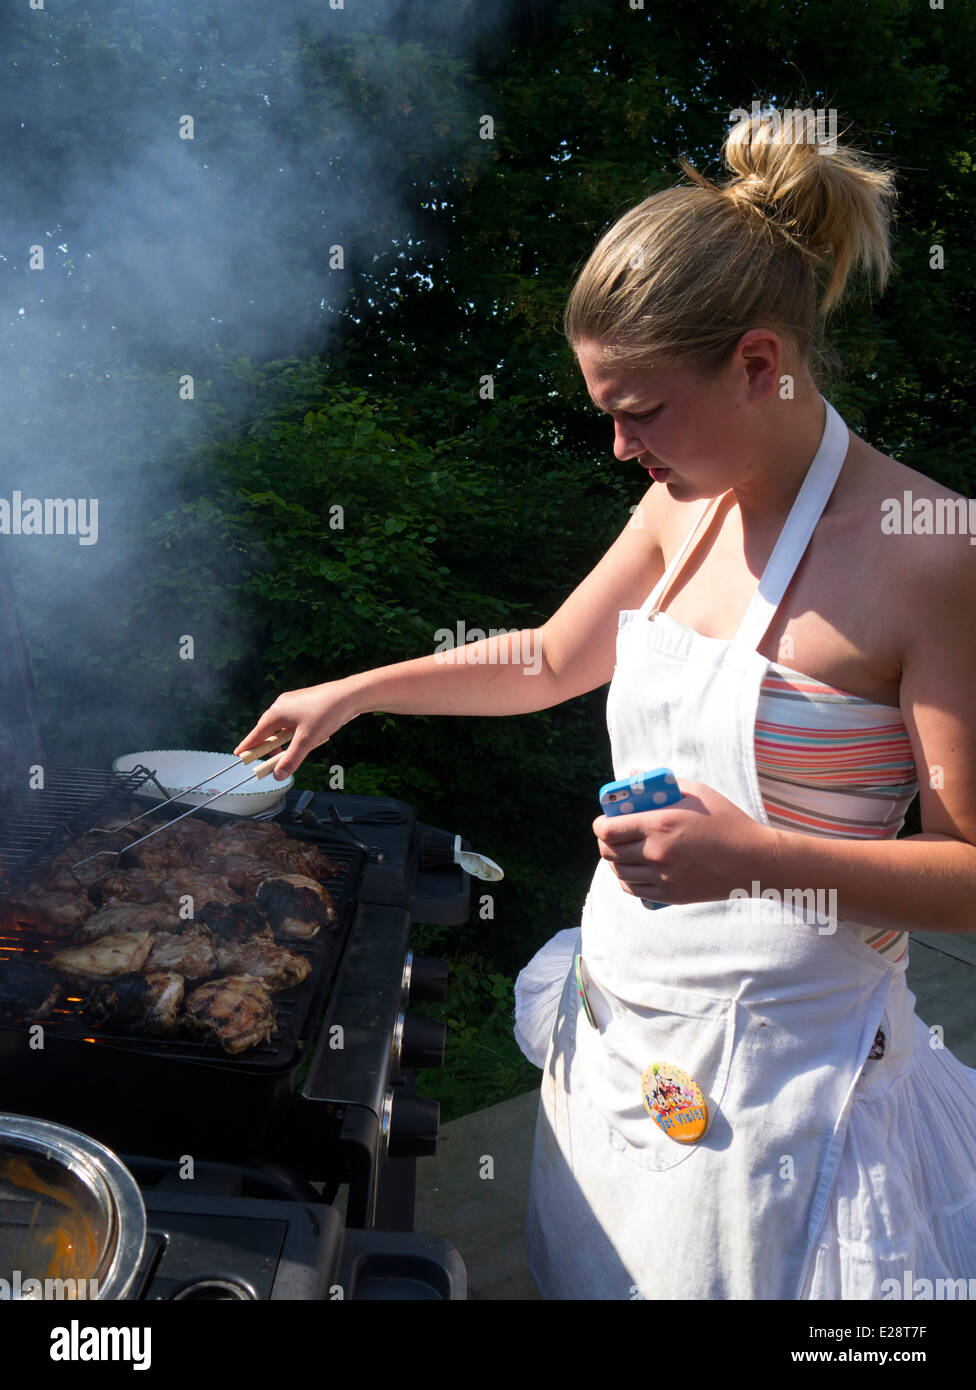 Woman cooking on a barbecue. Stock Photo